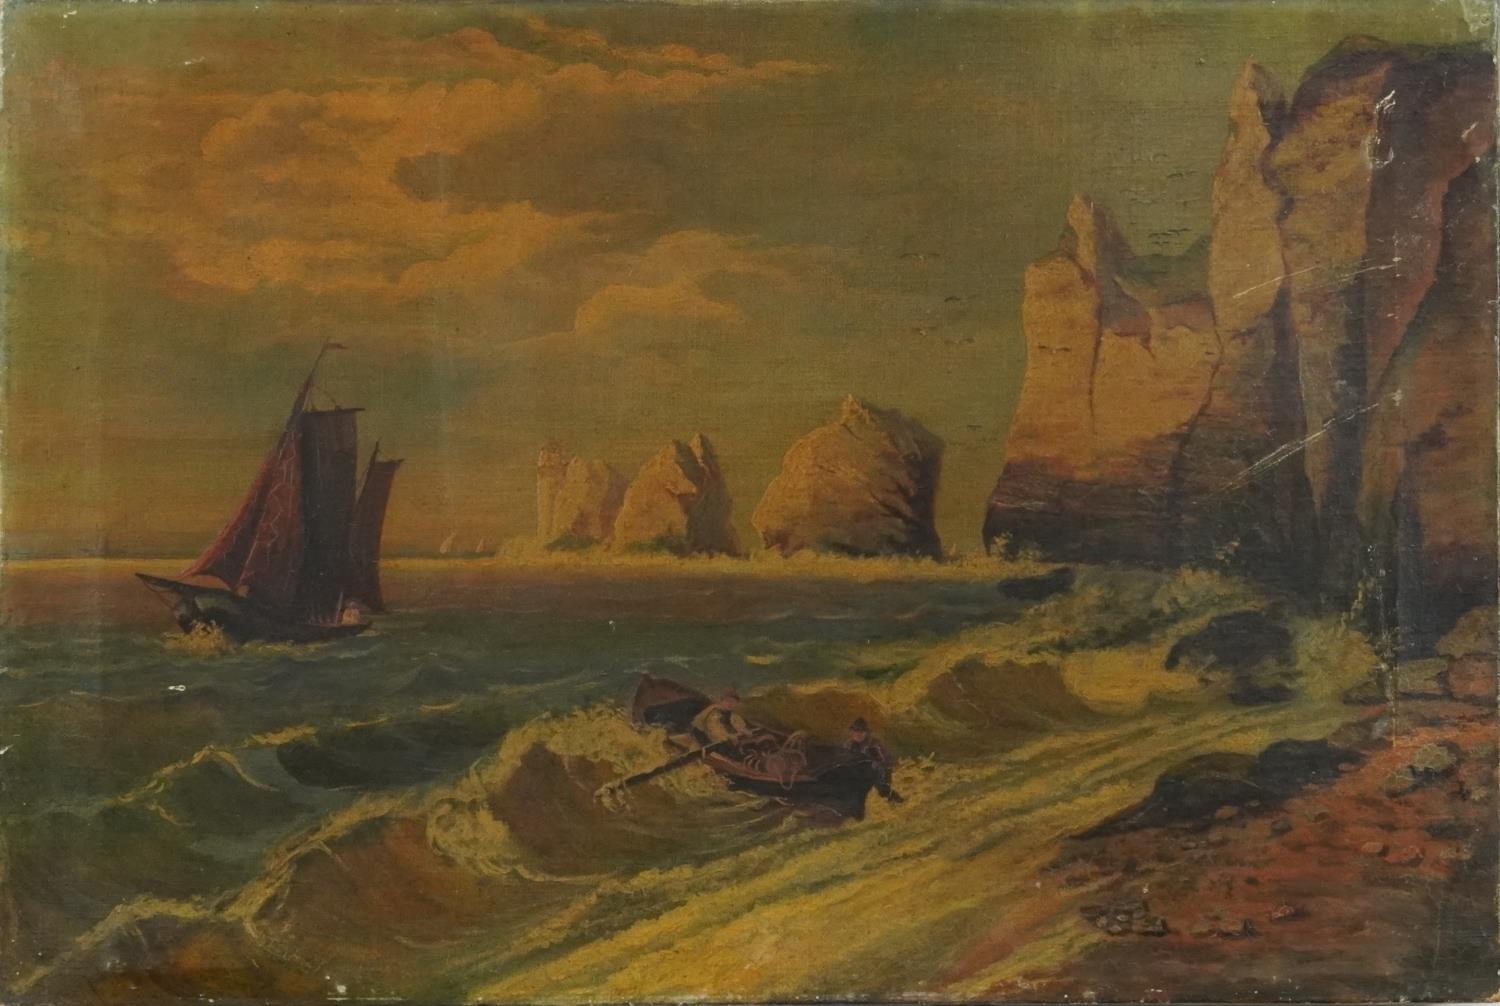 The Needles, Isle of Wight with fishermen, 19th century English school oil on canvas, unframed, 61cm